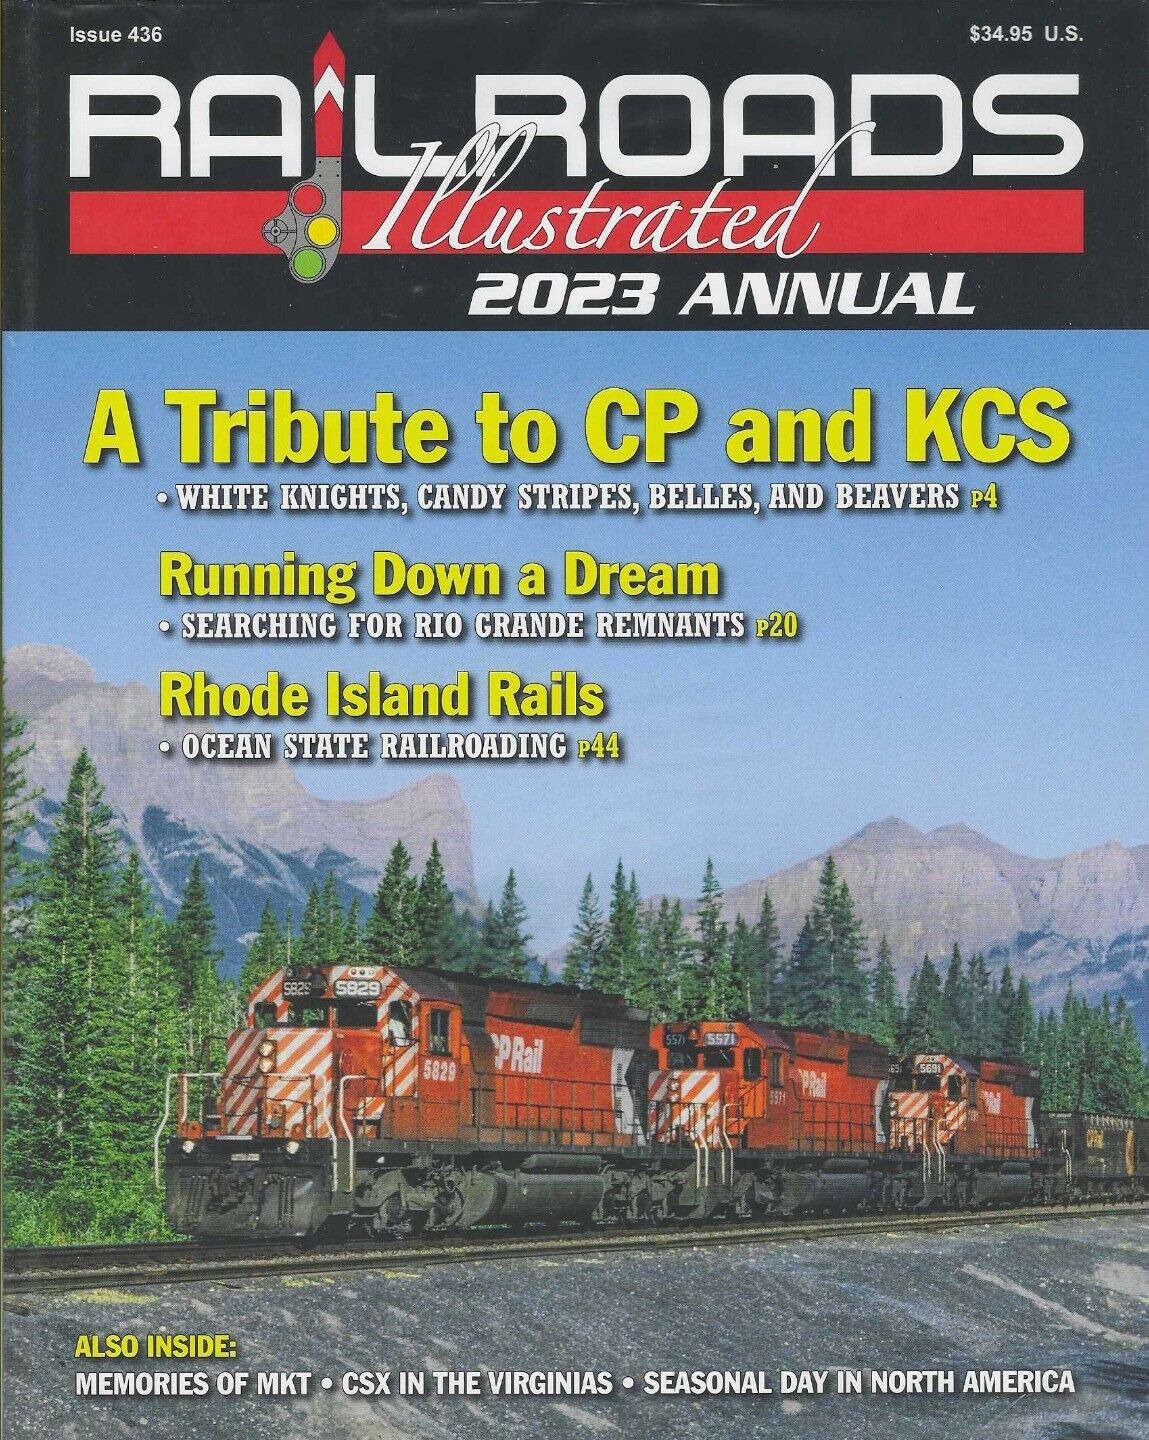 RAILROADS ILLUSTRATED 2023 ANNUAL: A Tribute to CP and KCS (BRAND NEW BOOK)